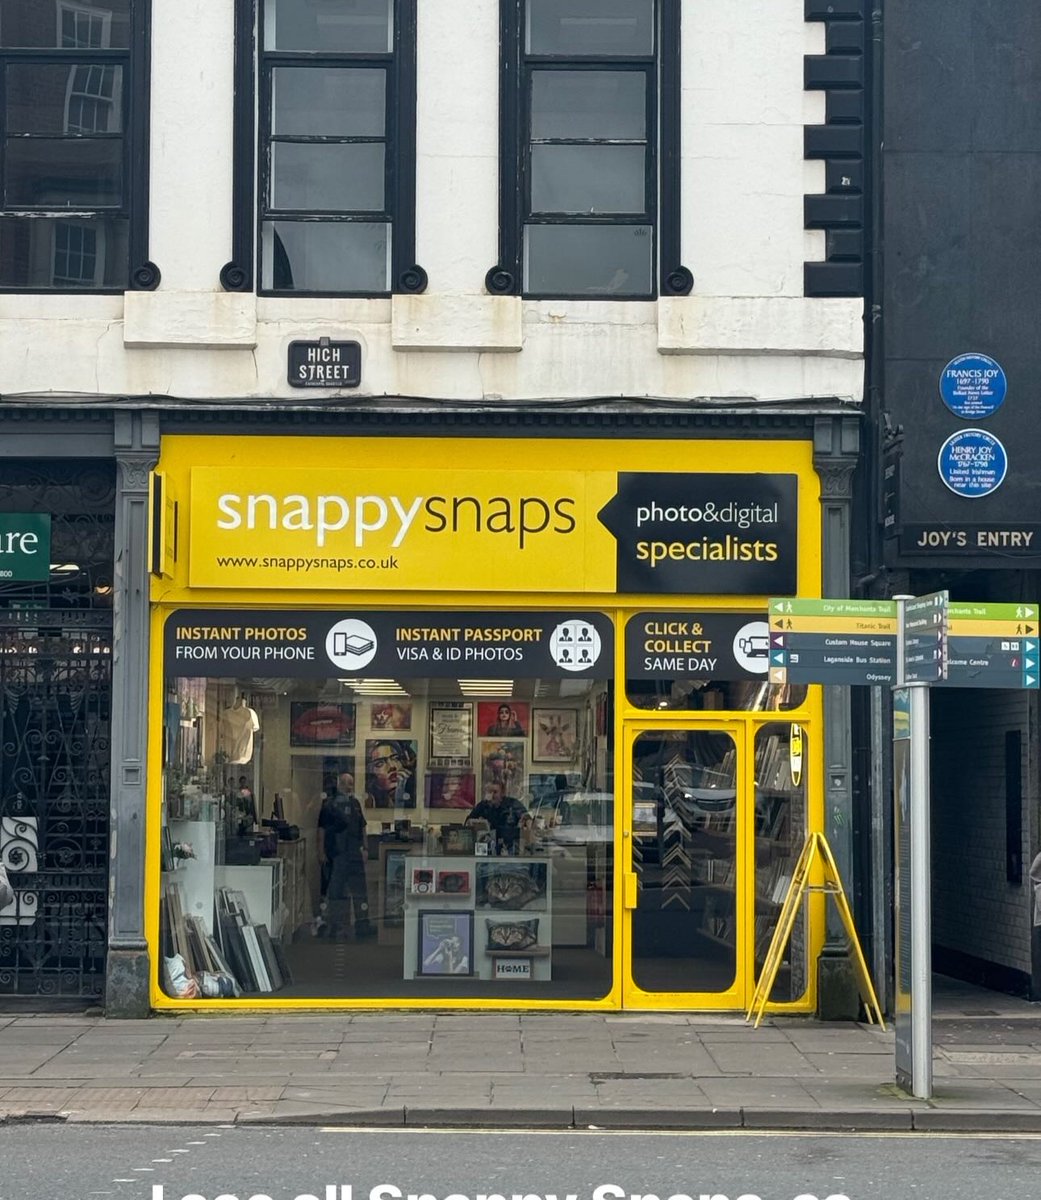 I regard all Snappy Snaps as unofficial memorials to George Michael. ❤️